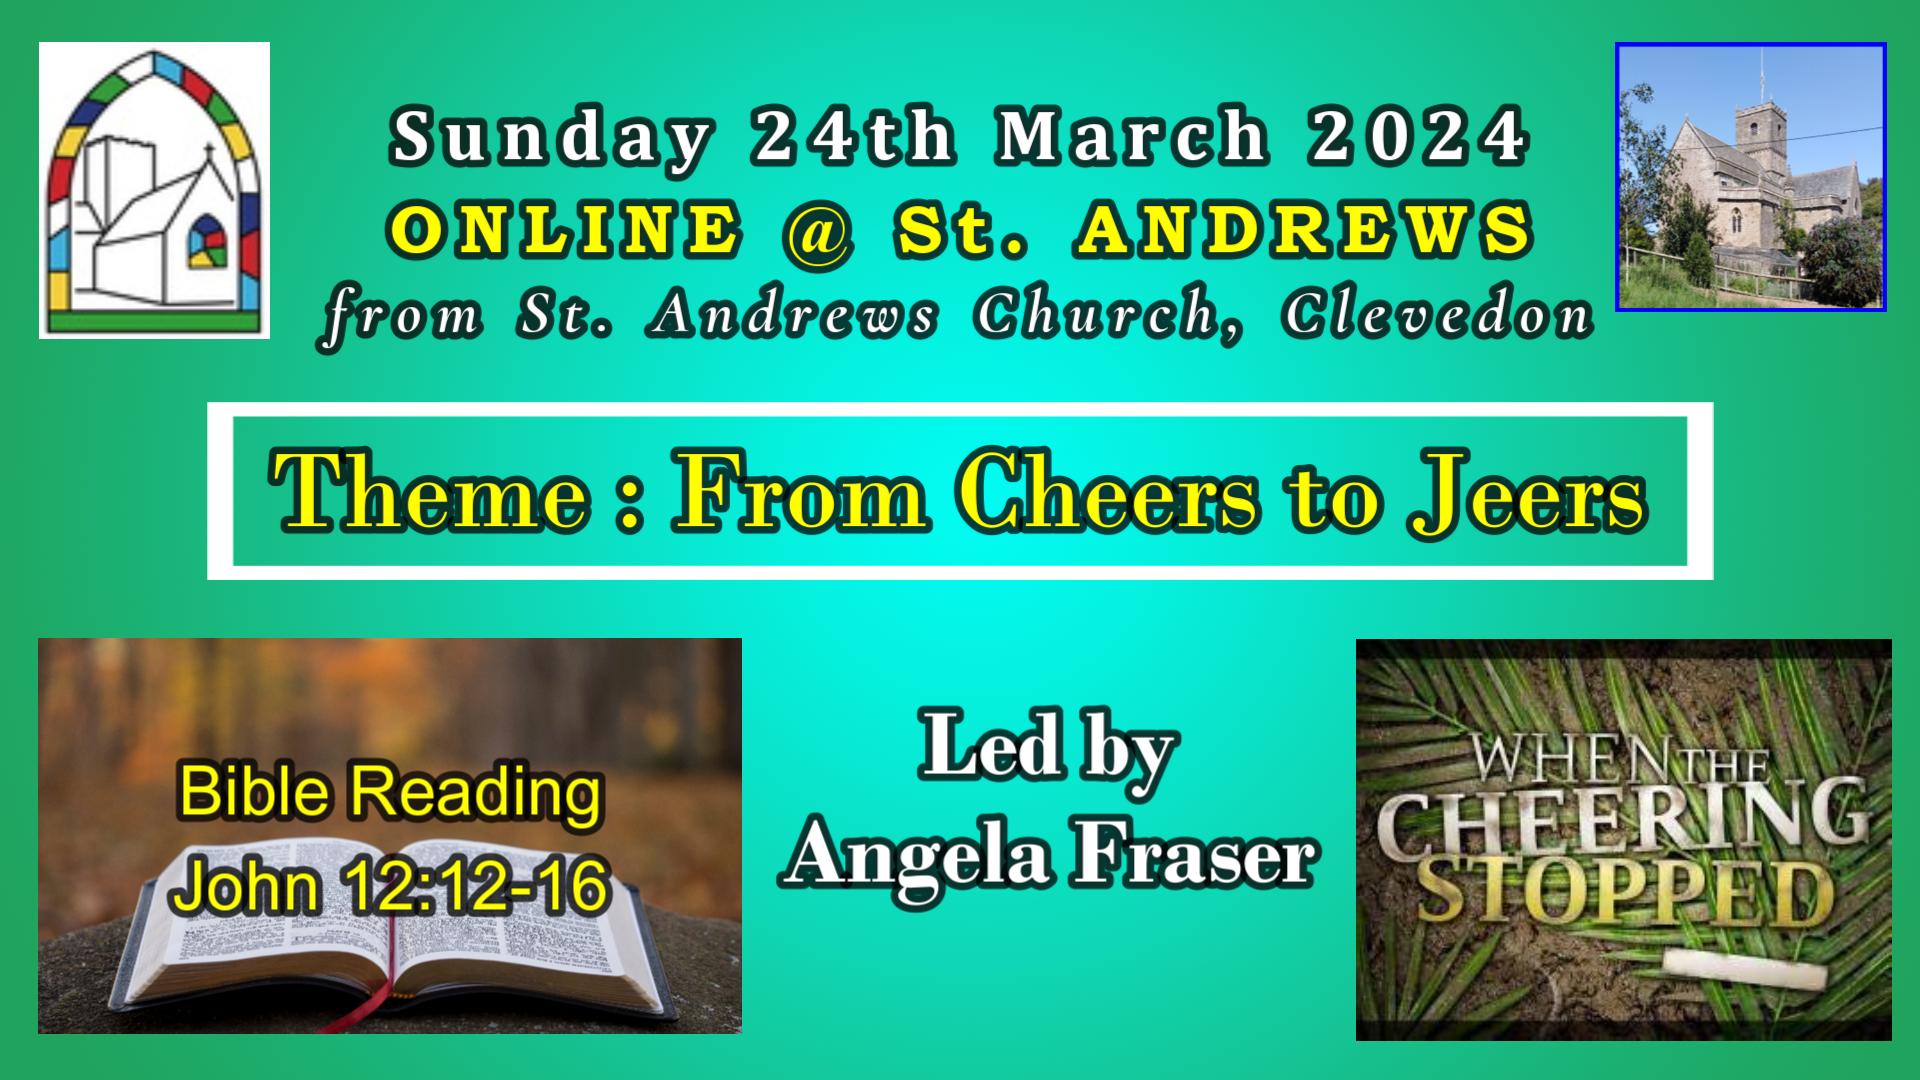 St Andrew's Online: Palm Sunday